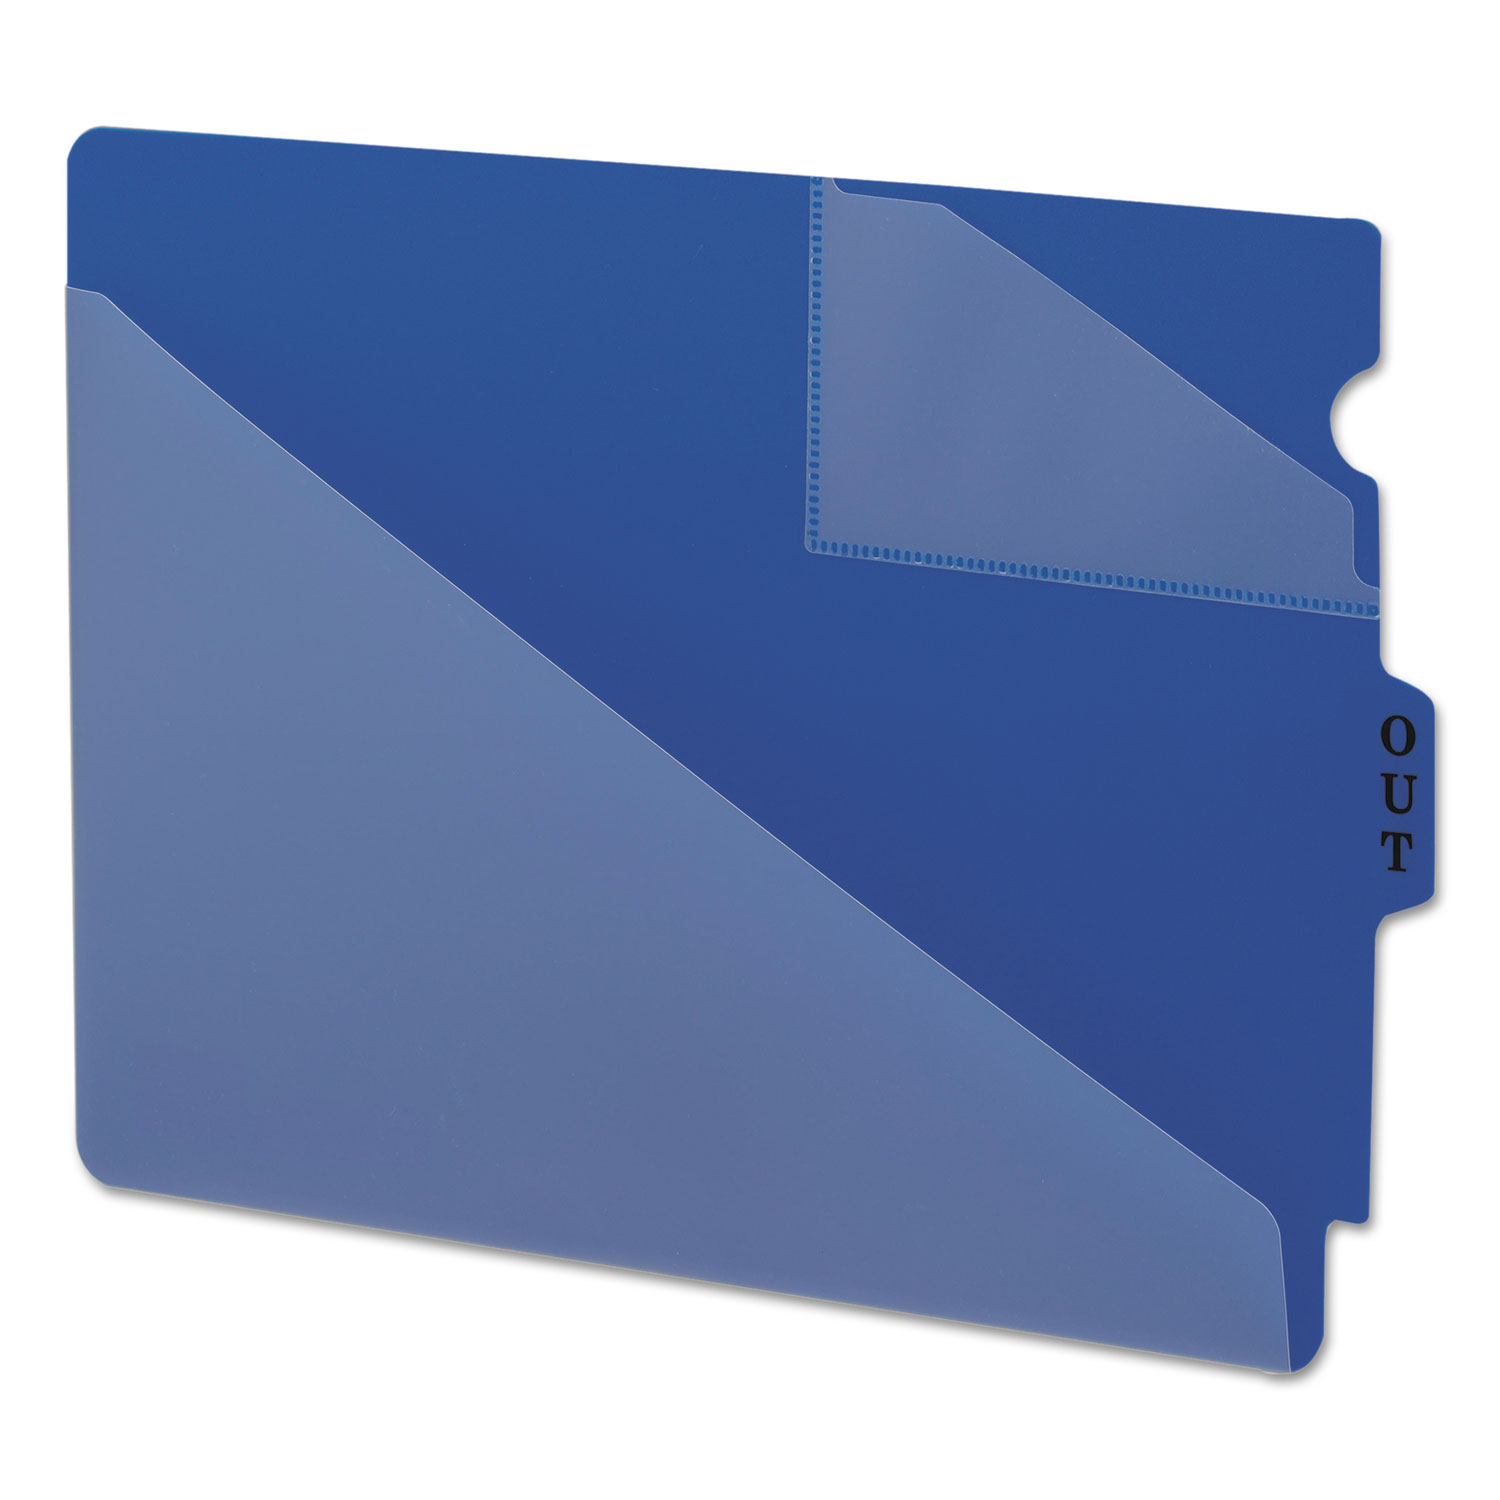  Smead 61961 End Tab Poly Out Guides, Two-Pocket Style, 1/3-Cut End Tab, Out, 8.5 x 11, Blue, 50/Box (SMD61961) 